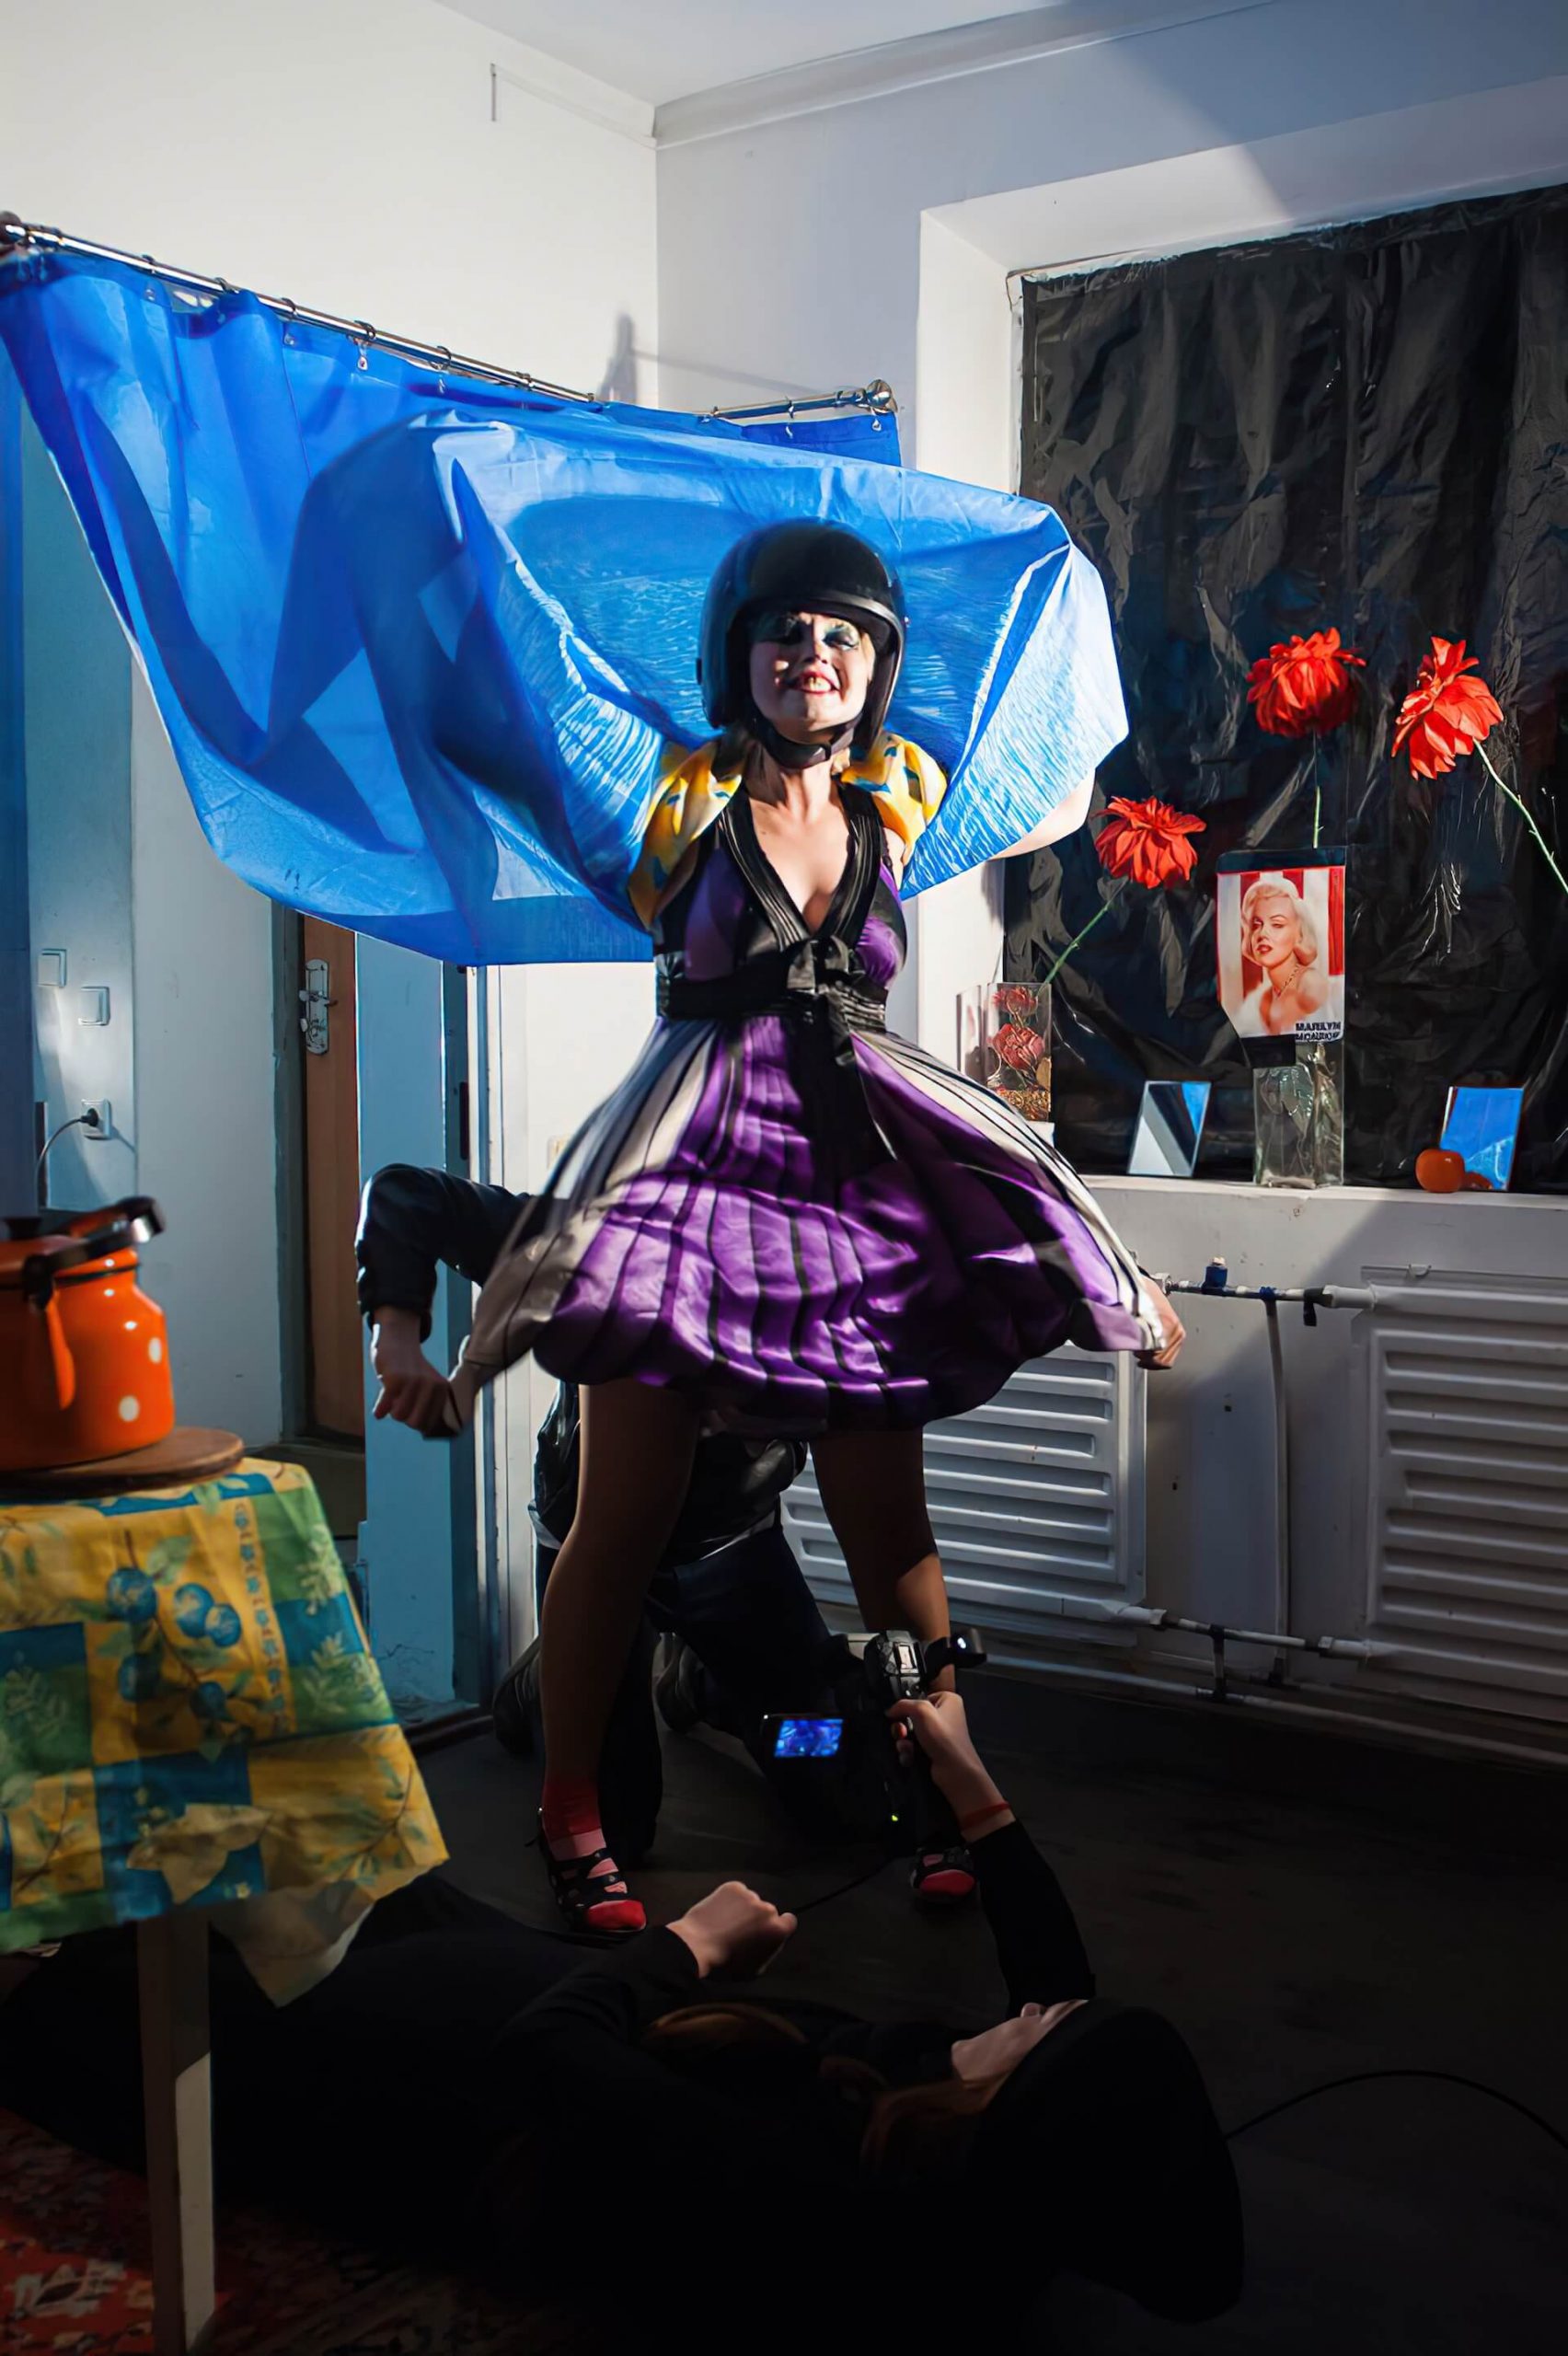 A woman with heavy makeup is wearing a helmet and wrapping herself with a blue curtain